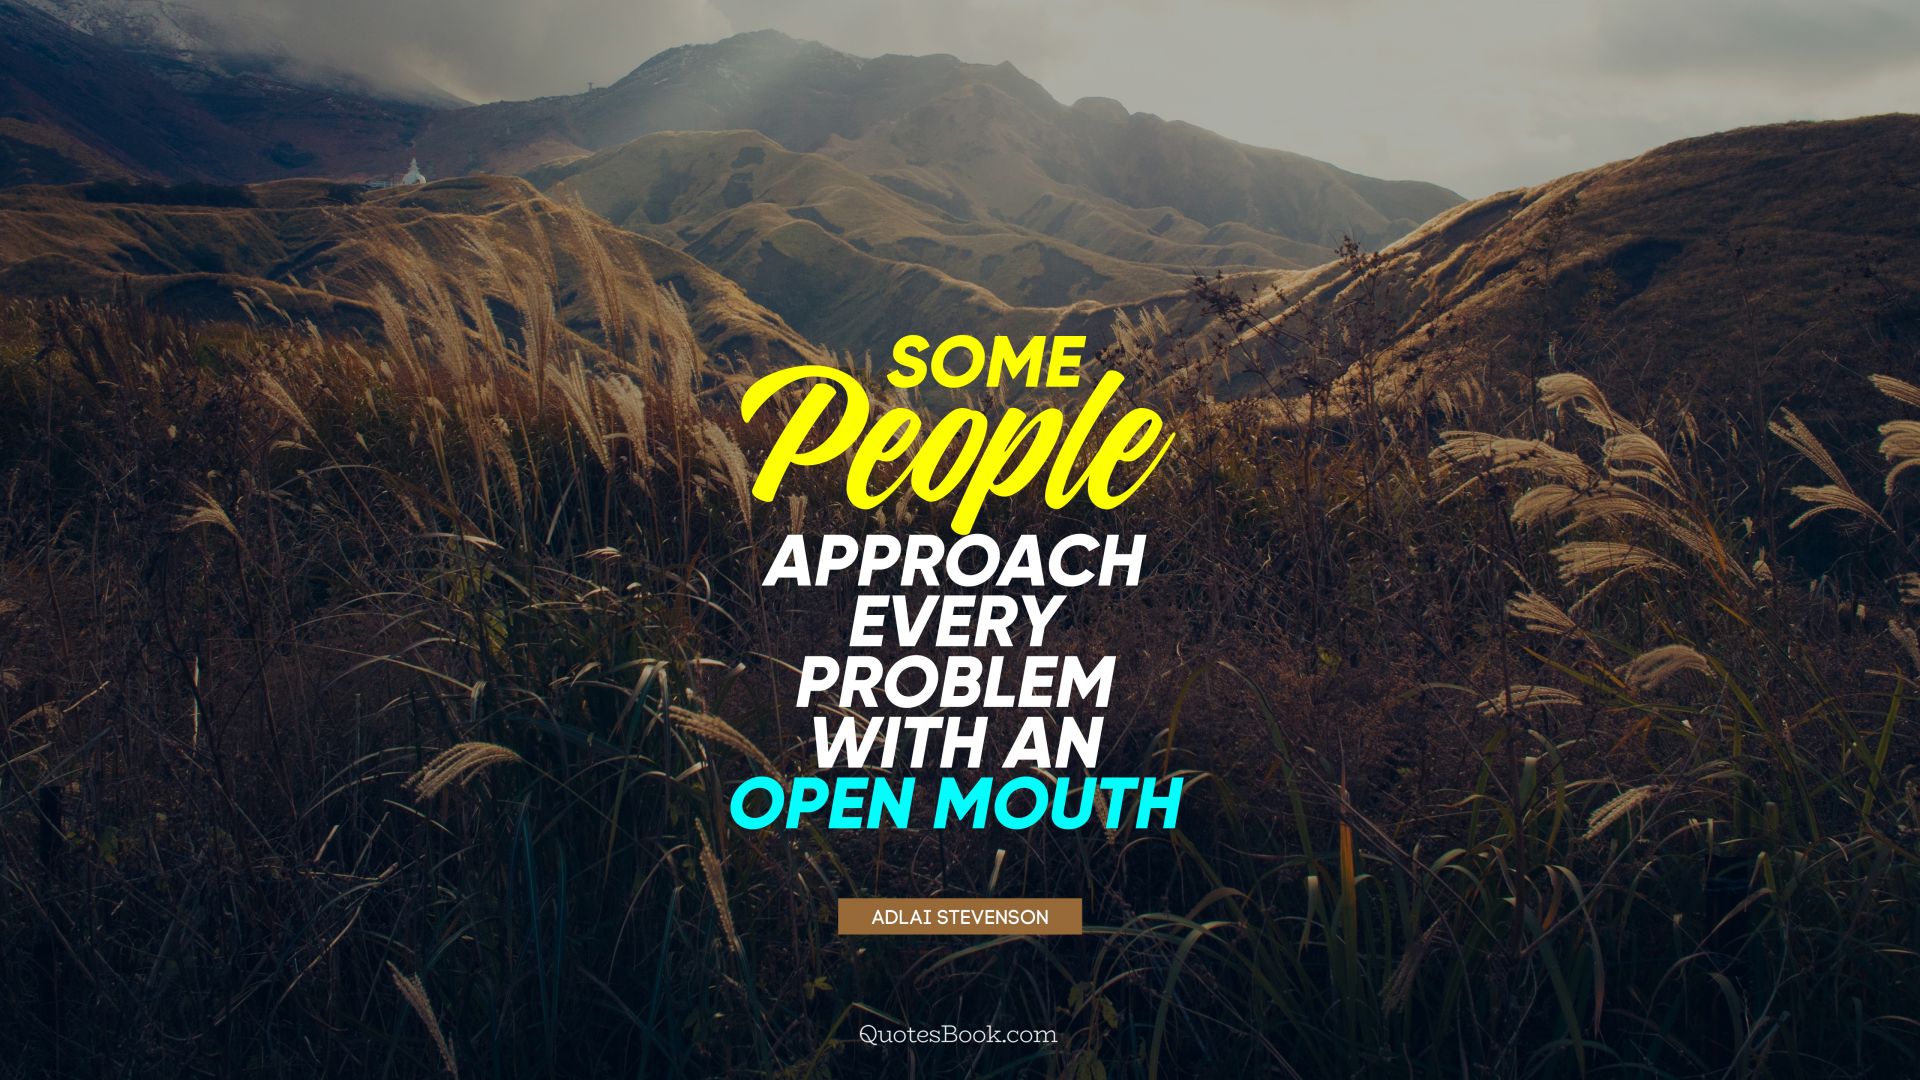 Some people approach every problem with an open mouth. - Quote by Adlai Stevenson